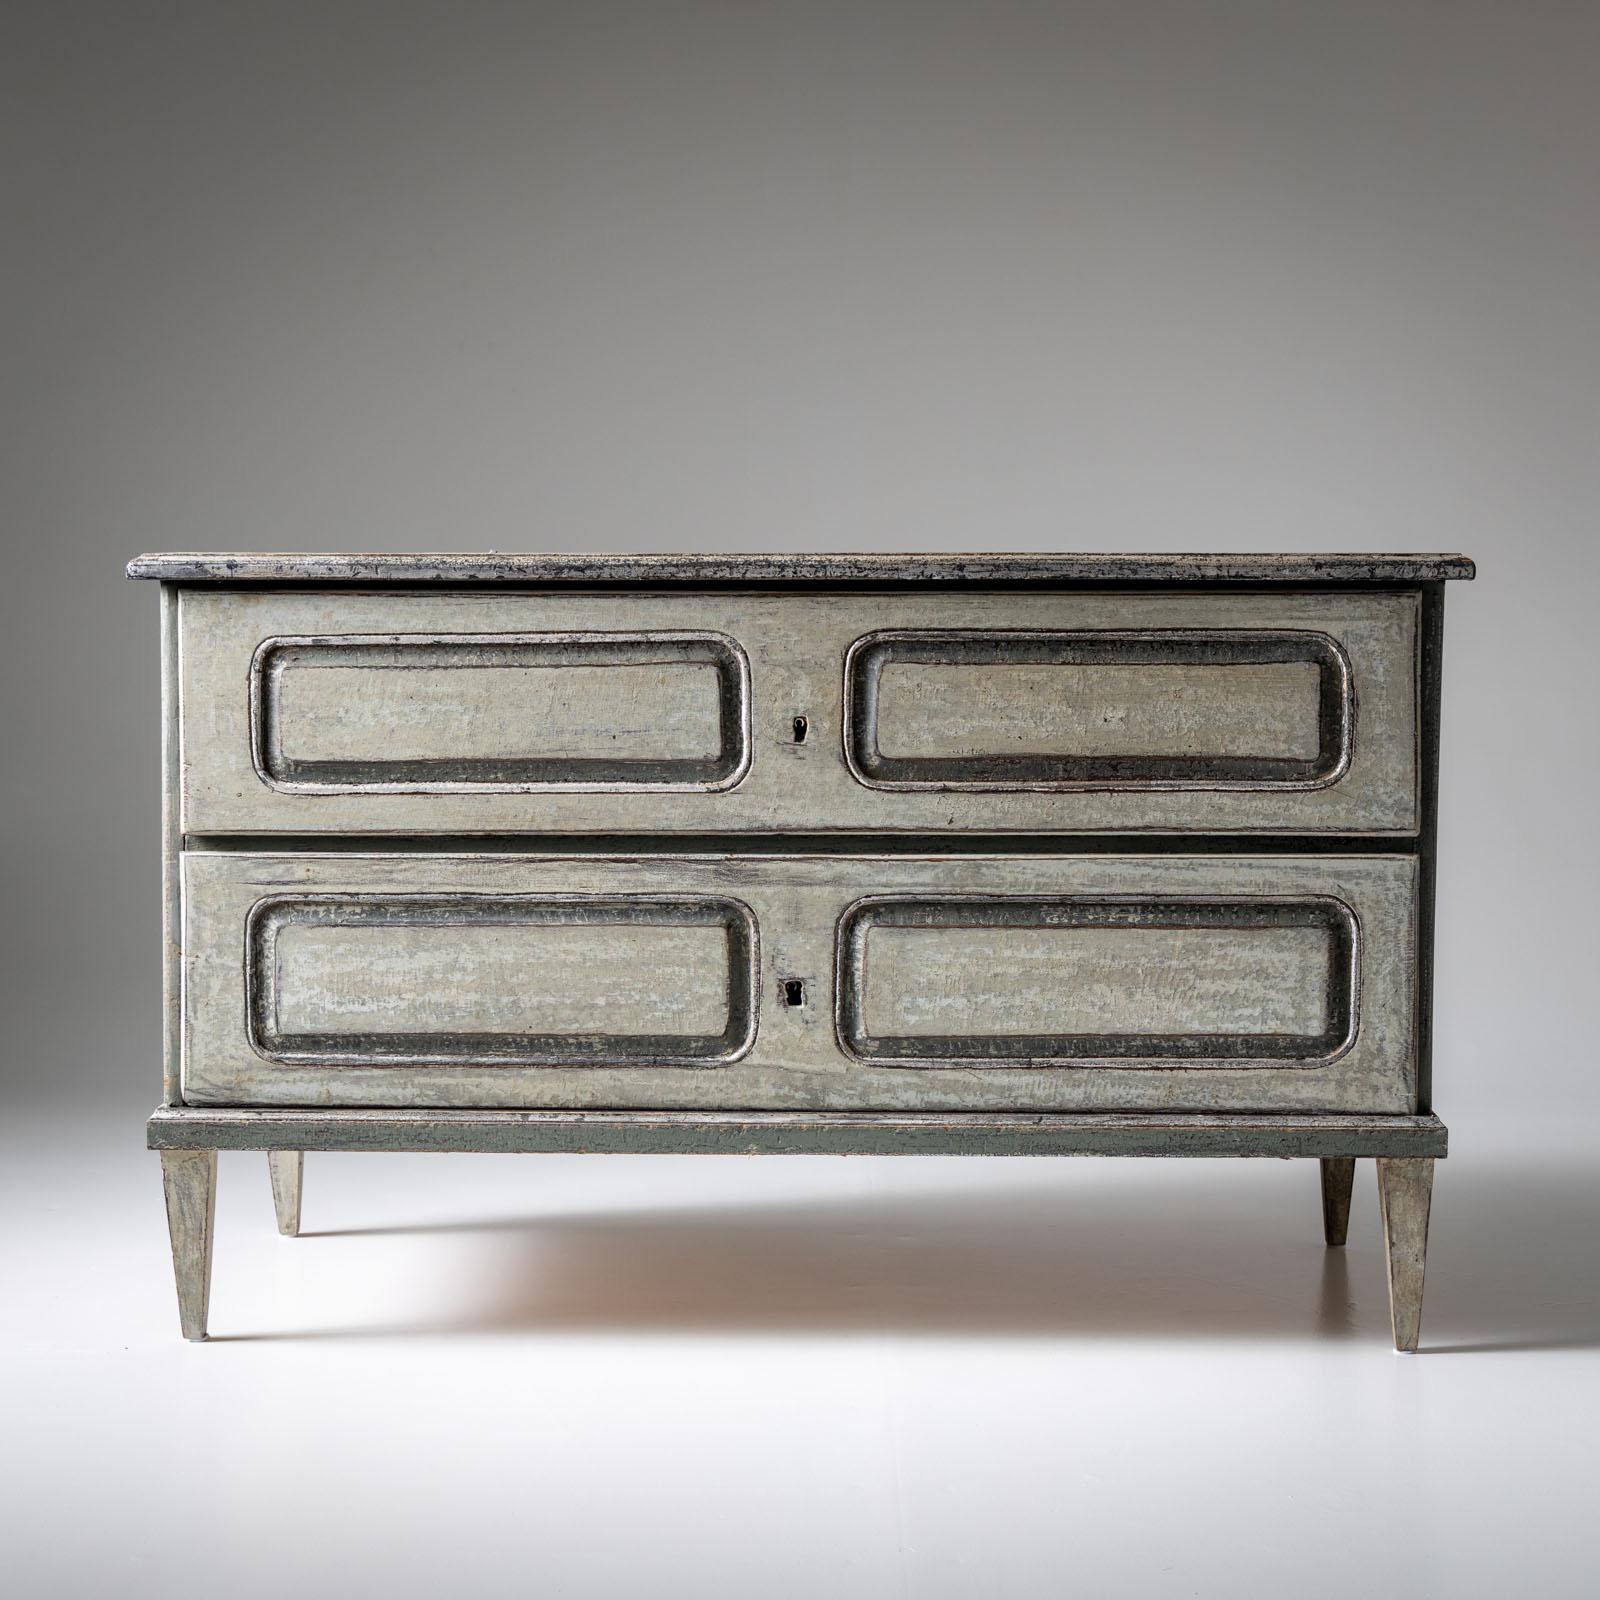 Large two-drawer chest of drawers with square tapered legs and panels featuring rounded corners. Recently painted in a light green hue with a hint of silver patina in select areas, it exudes a subtle vintage charm. The antique finish applied to the